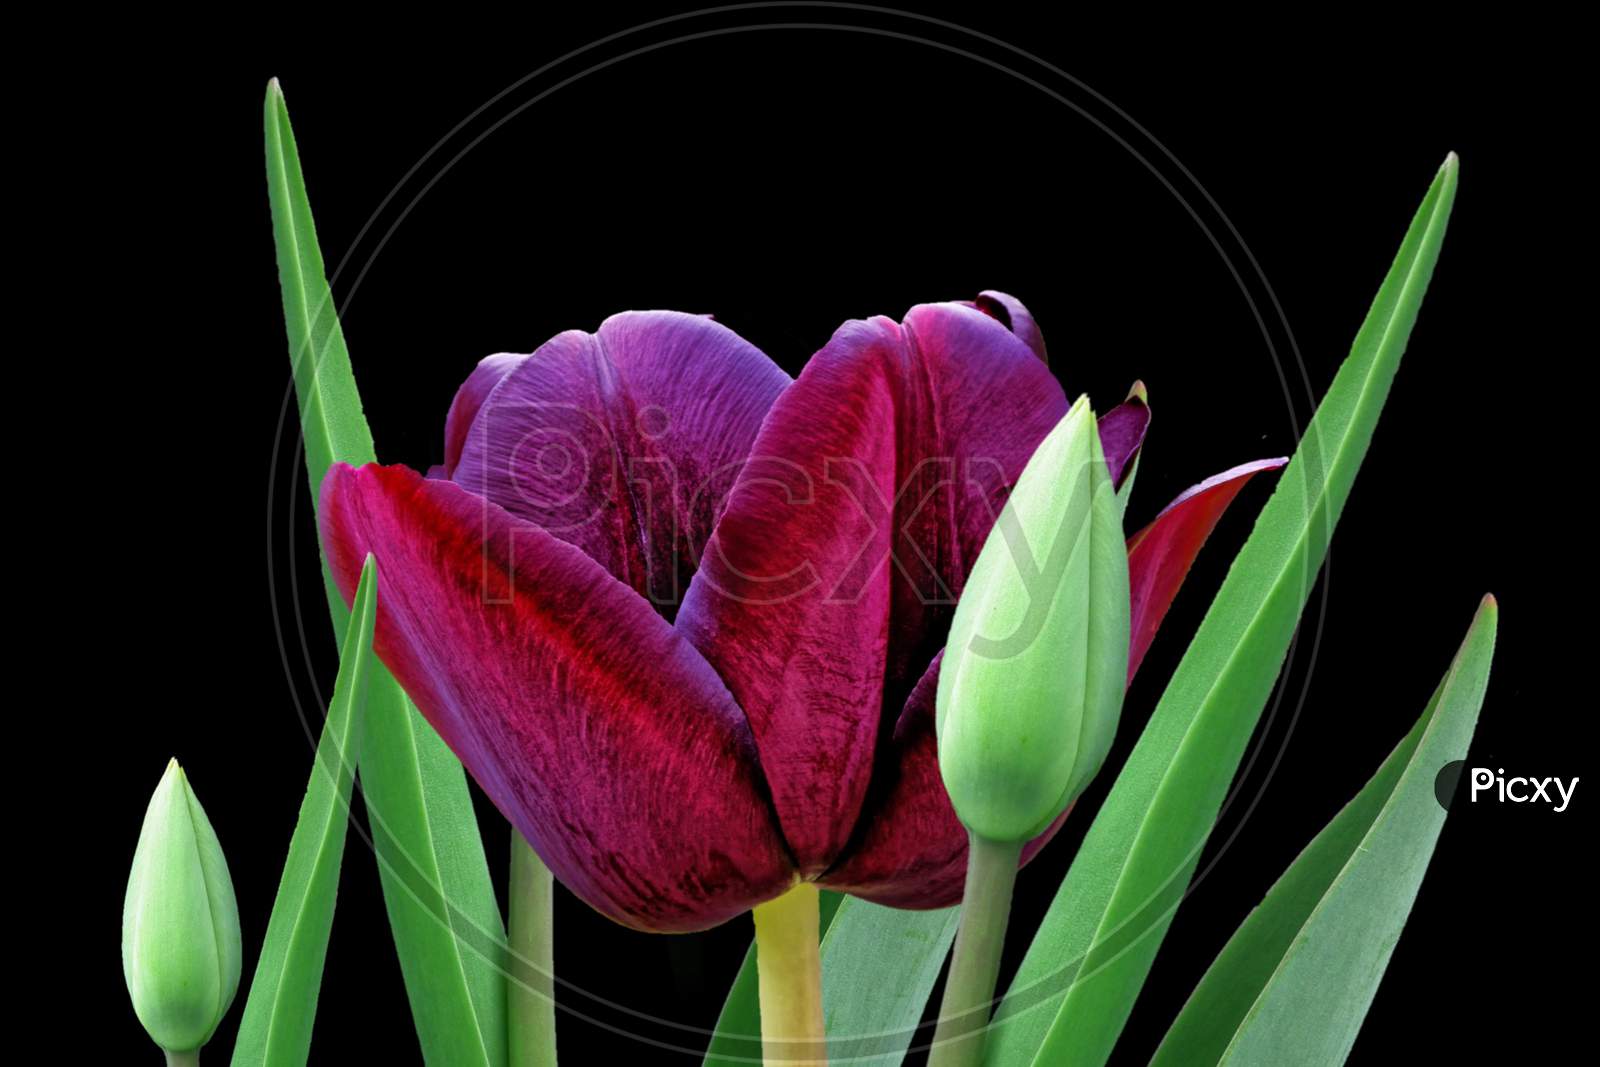 Tulip lily flower with leaf and bud isolated on black background